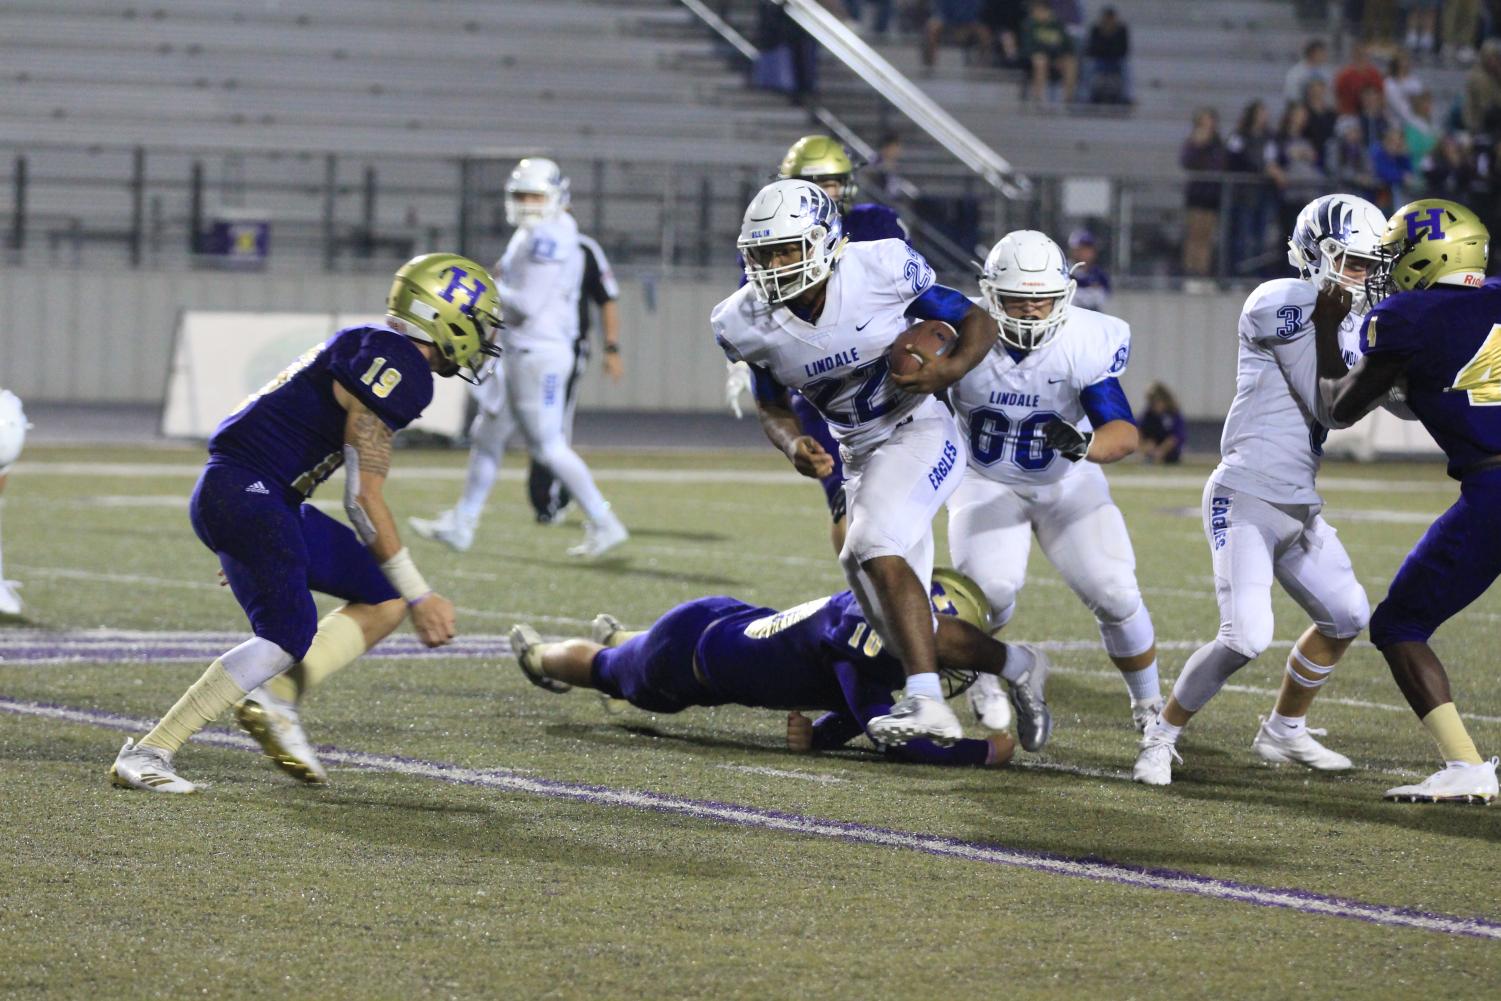 Sophomore Jordan Jenkins runs the ball toward the end zone. In this game, the Eagles beat Hallsville 42-28, and they are 3-1 so far in district, where they are tied with Whitehouse for second place.